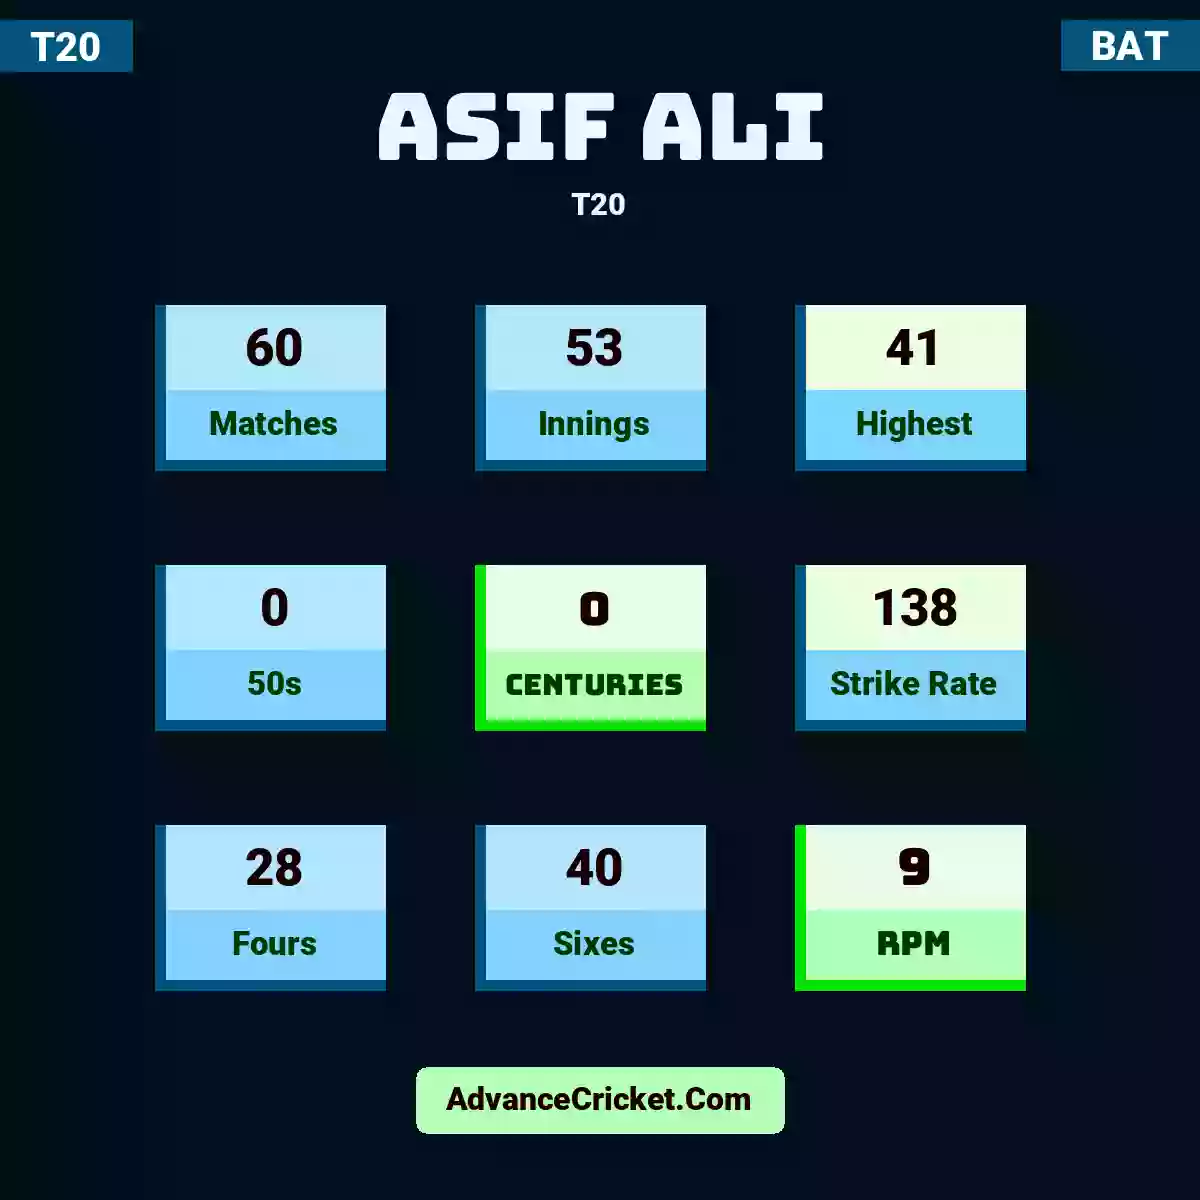 Asif Ali T20 , Asif Ali played 60 matches, scored 41 runs as highest, 0 half-centuries, and 0 centuries, with a strike rate of 138. A.Ali hit 28 fours and 40 sixes, with an RPM of 9.